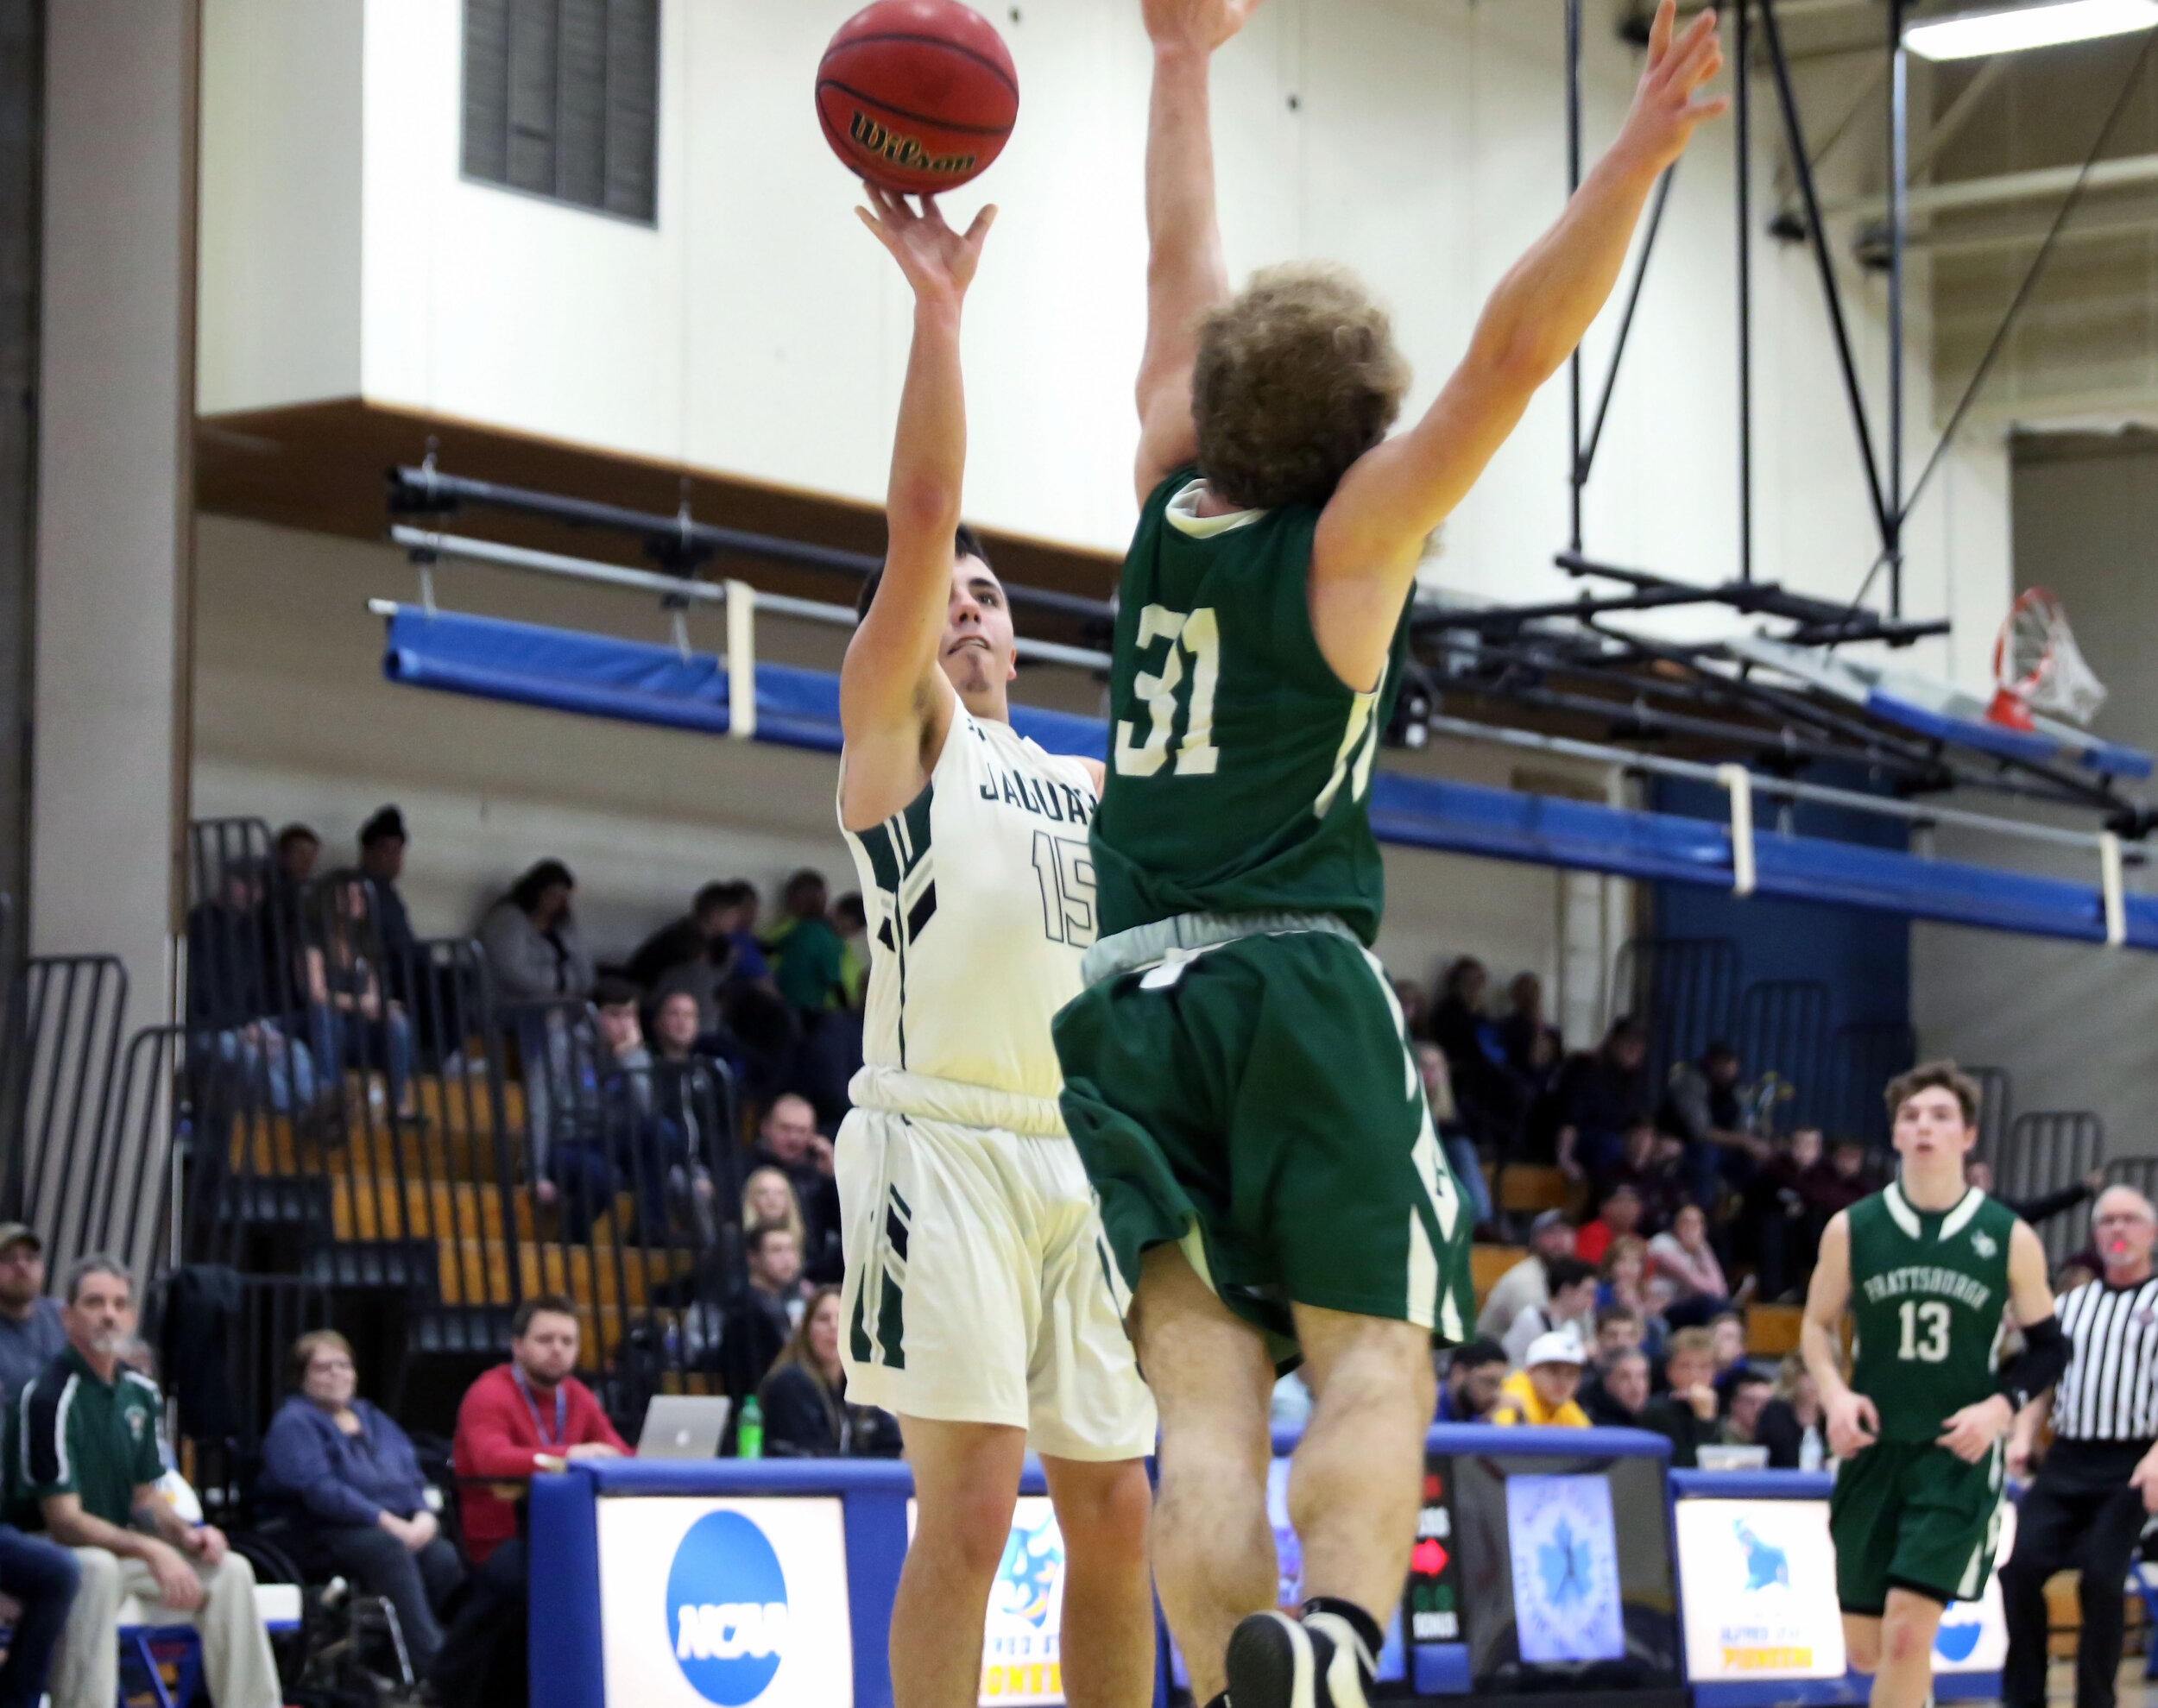  Genesee Valley senior Trevor Clark (15) puts up a floater over the Prattsburgh defense during the main event of the 6th Annual Dan Barkley Showcase at Alfred State College, Saturday evening. [Chris Brooks/WellsvilleSports.com] 